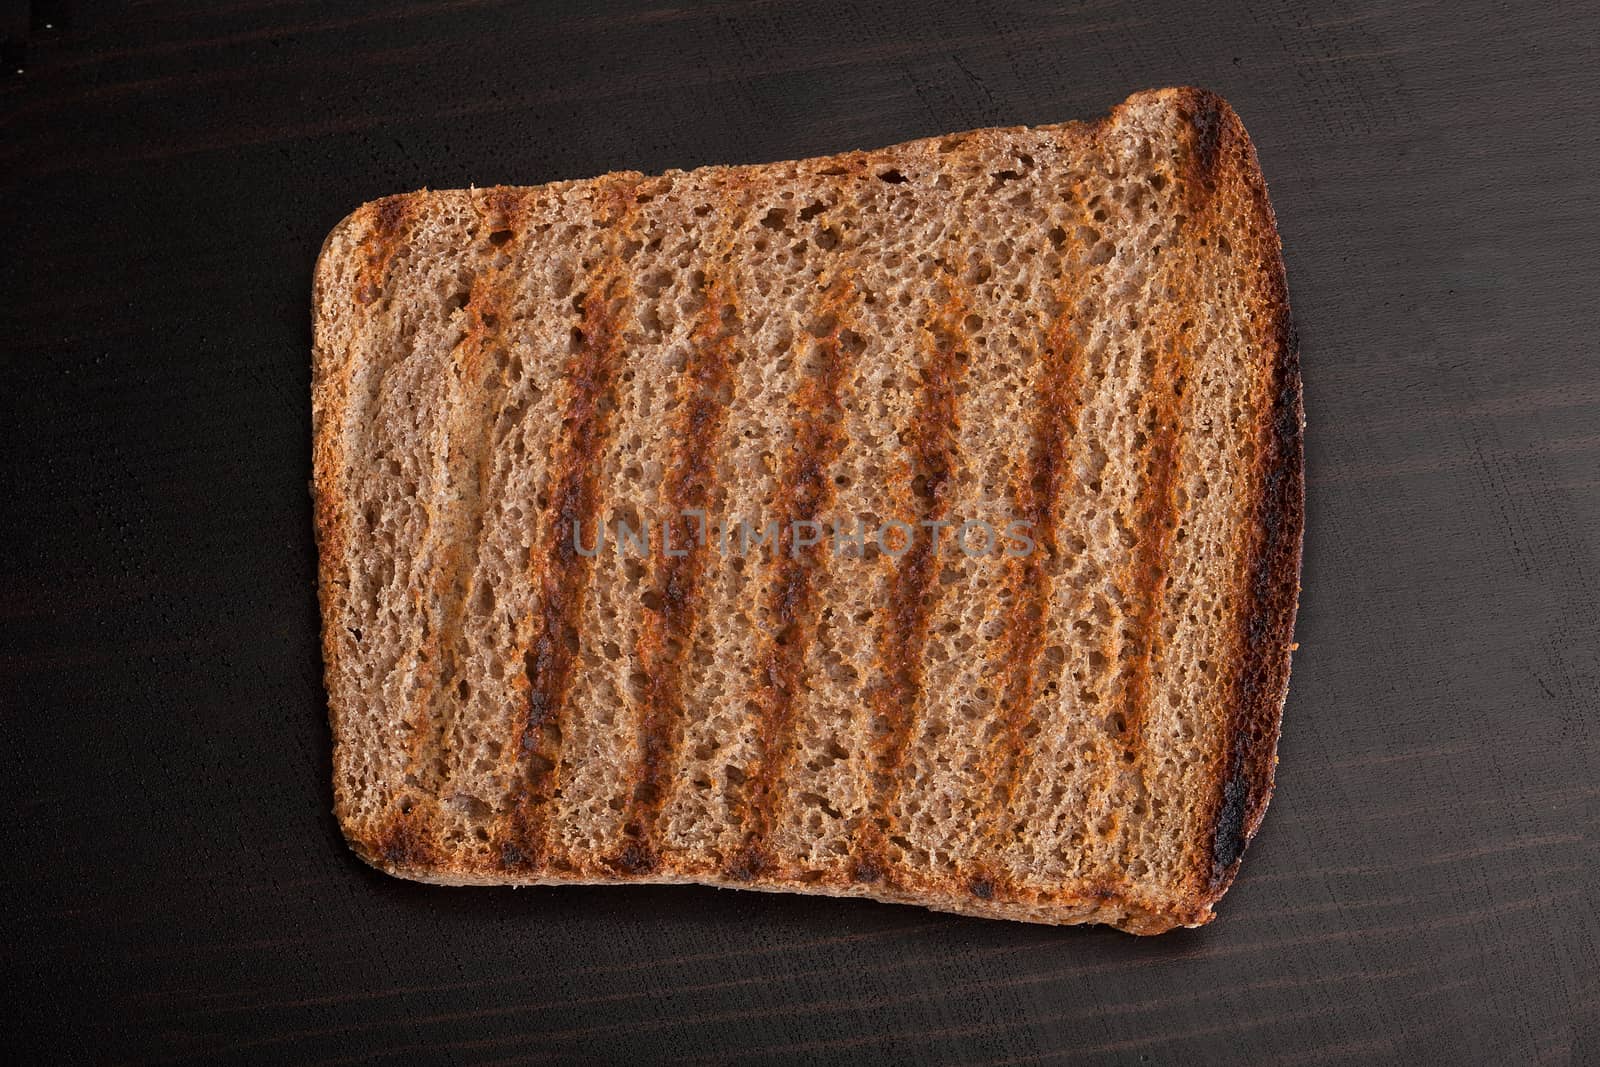 Toasted rye bread on the wooden table by Angorius